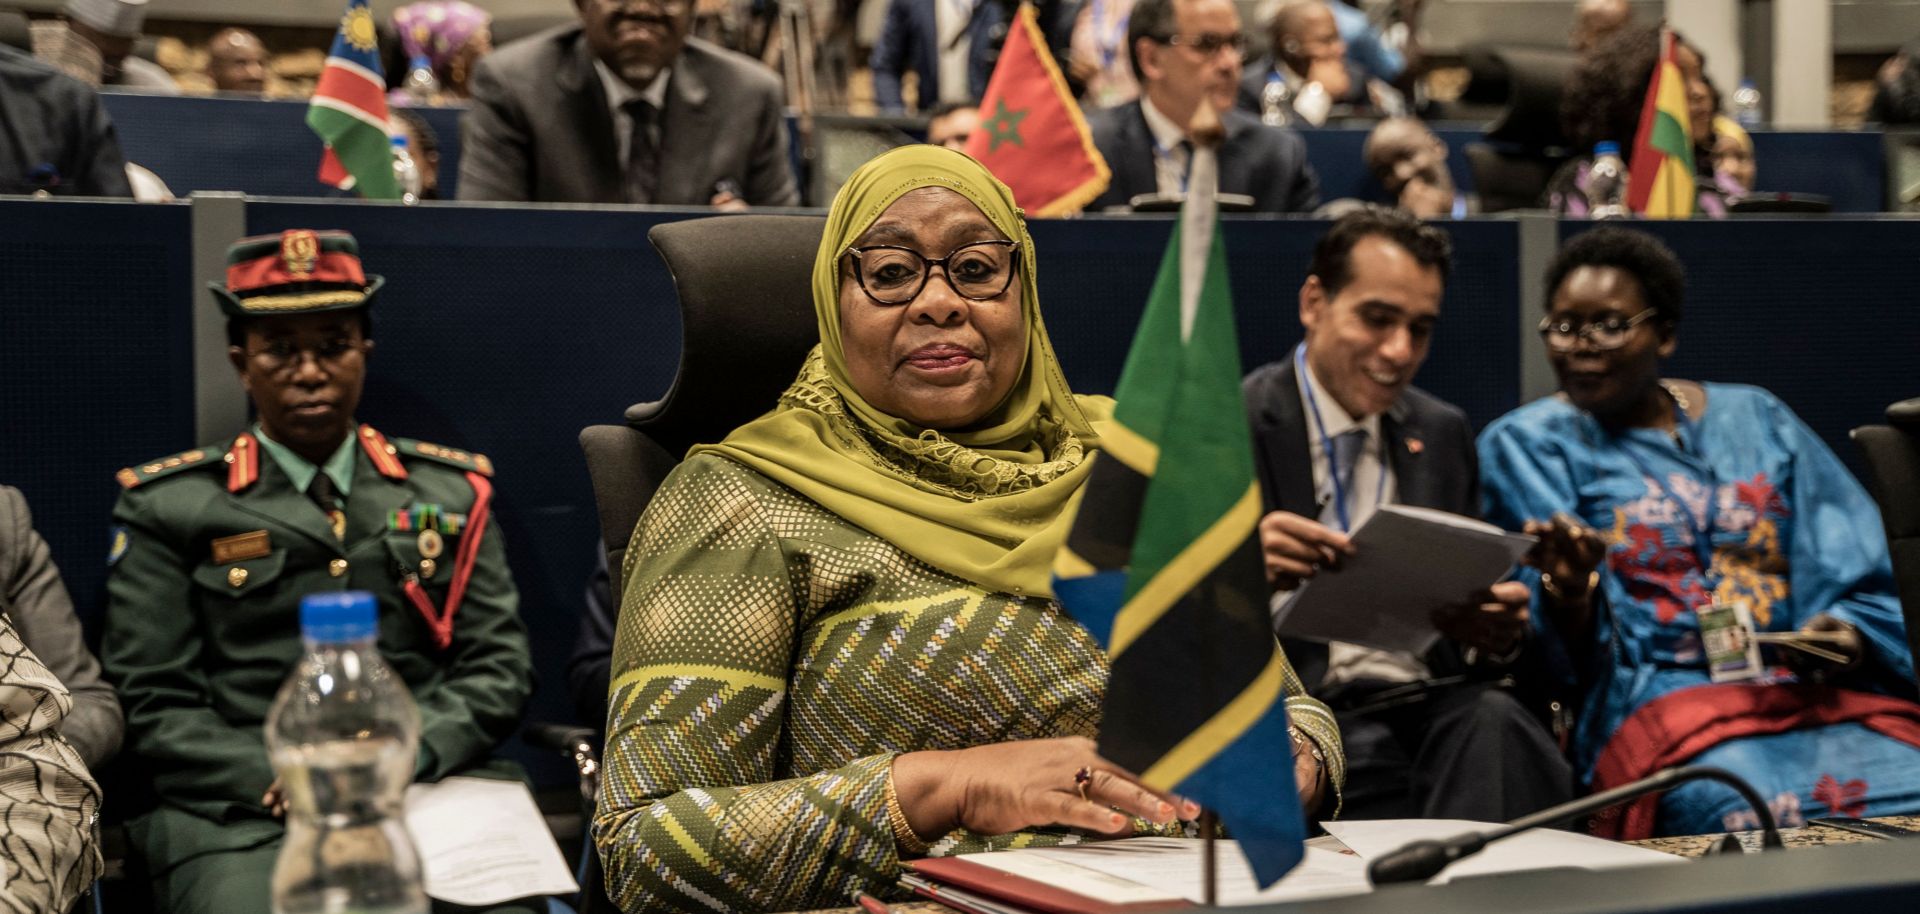 Tanzanian President Samia Suluhu Hassan (center) attends a mini-summit on the sidelines of the 36th Ordinary Session of the Assembly of the African Union (AU) in Addis Ababa, Ethiopia, on Feb.17, 2023.